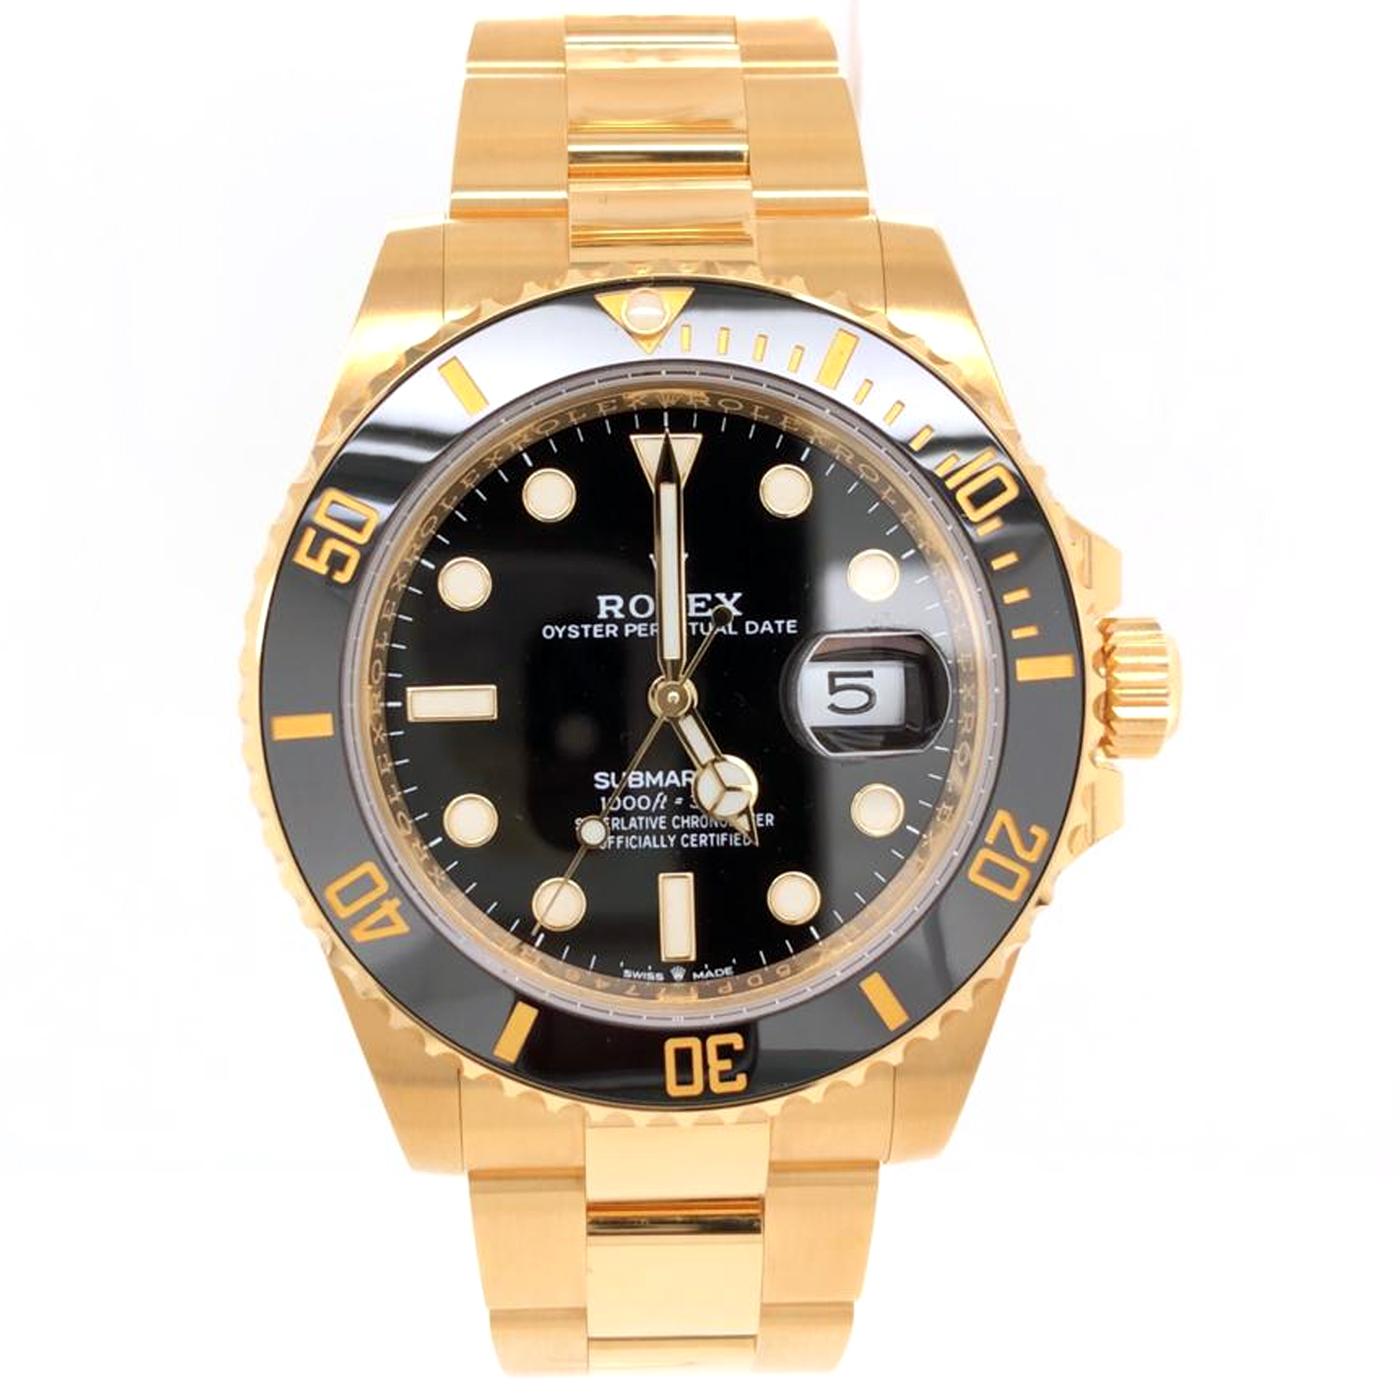 The oyster perpetual submariner date in 18 ct yellow gold in black ceramic and a black dial with large luminescent hour markers. It features a unidirectional rotatable bezel and solid-link Oyster bracelet. The latest generation Submariner and